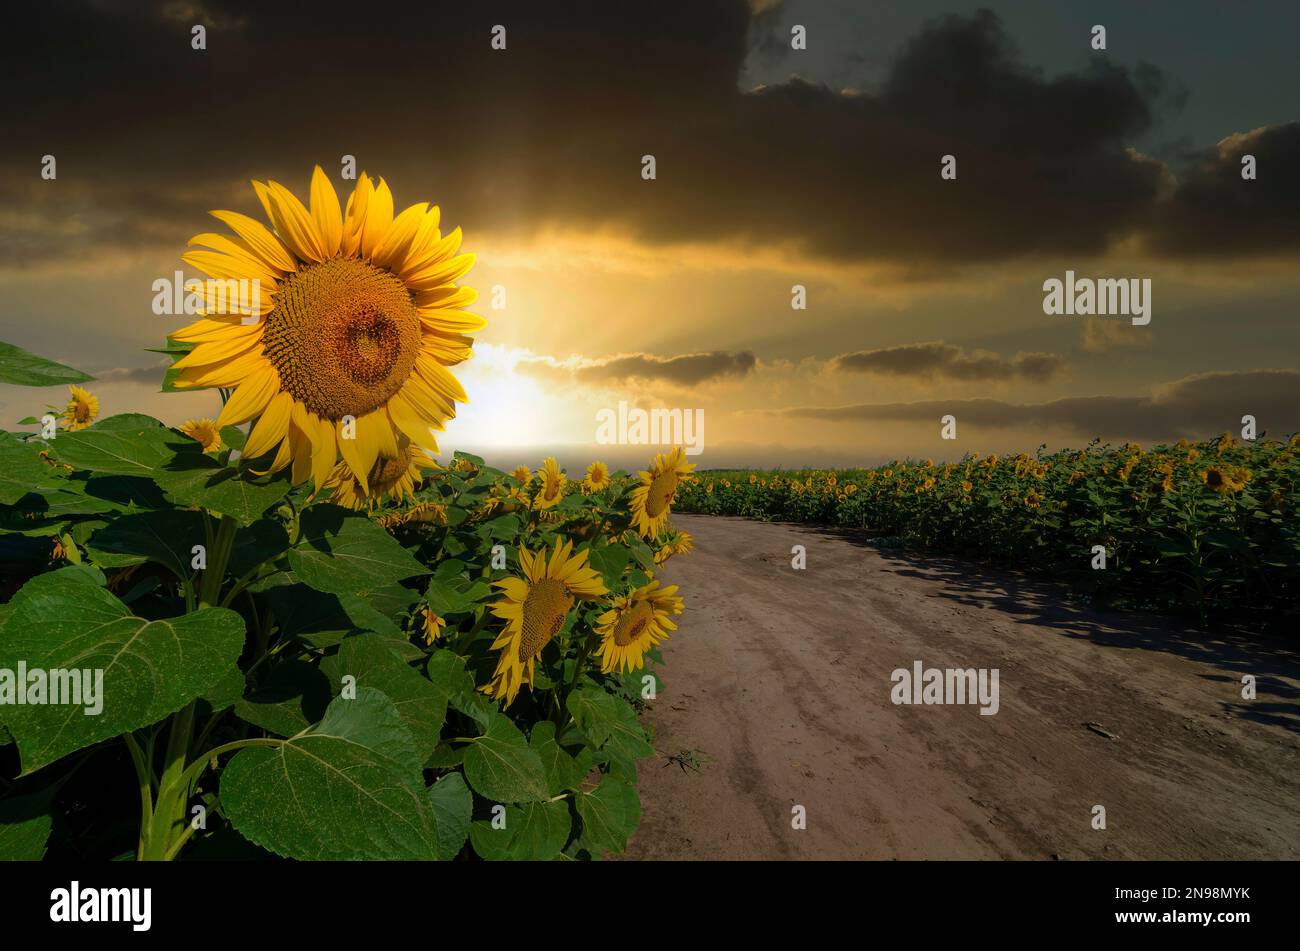 Dirt road in the field of blooming sunflowers at the sunset. Stock Photo